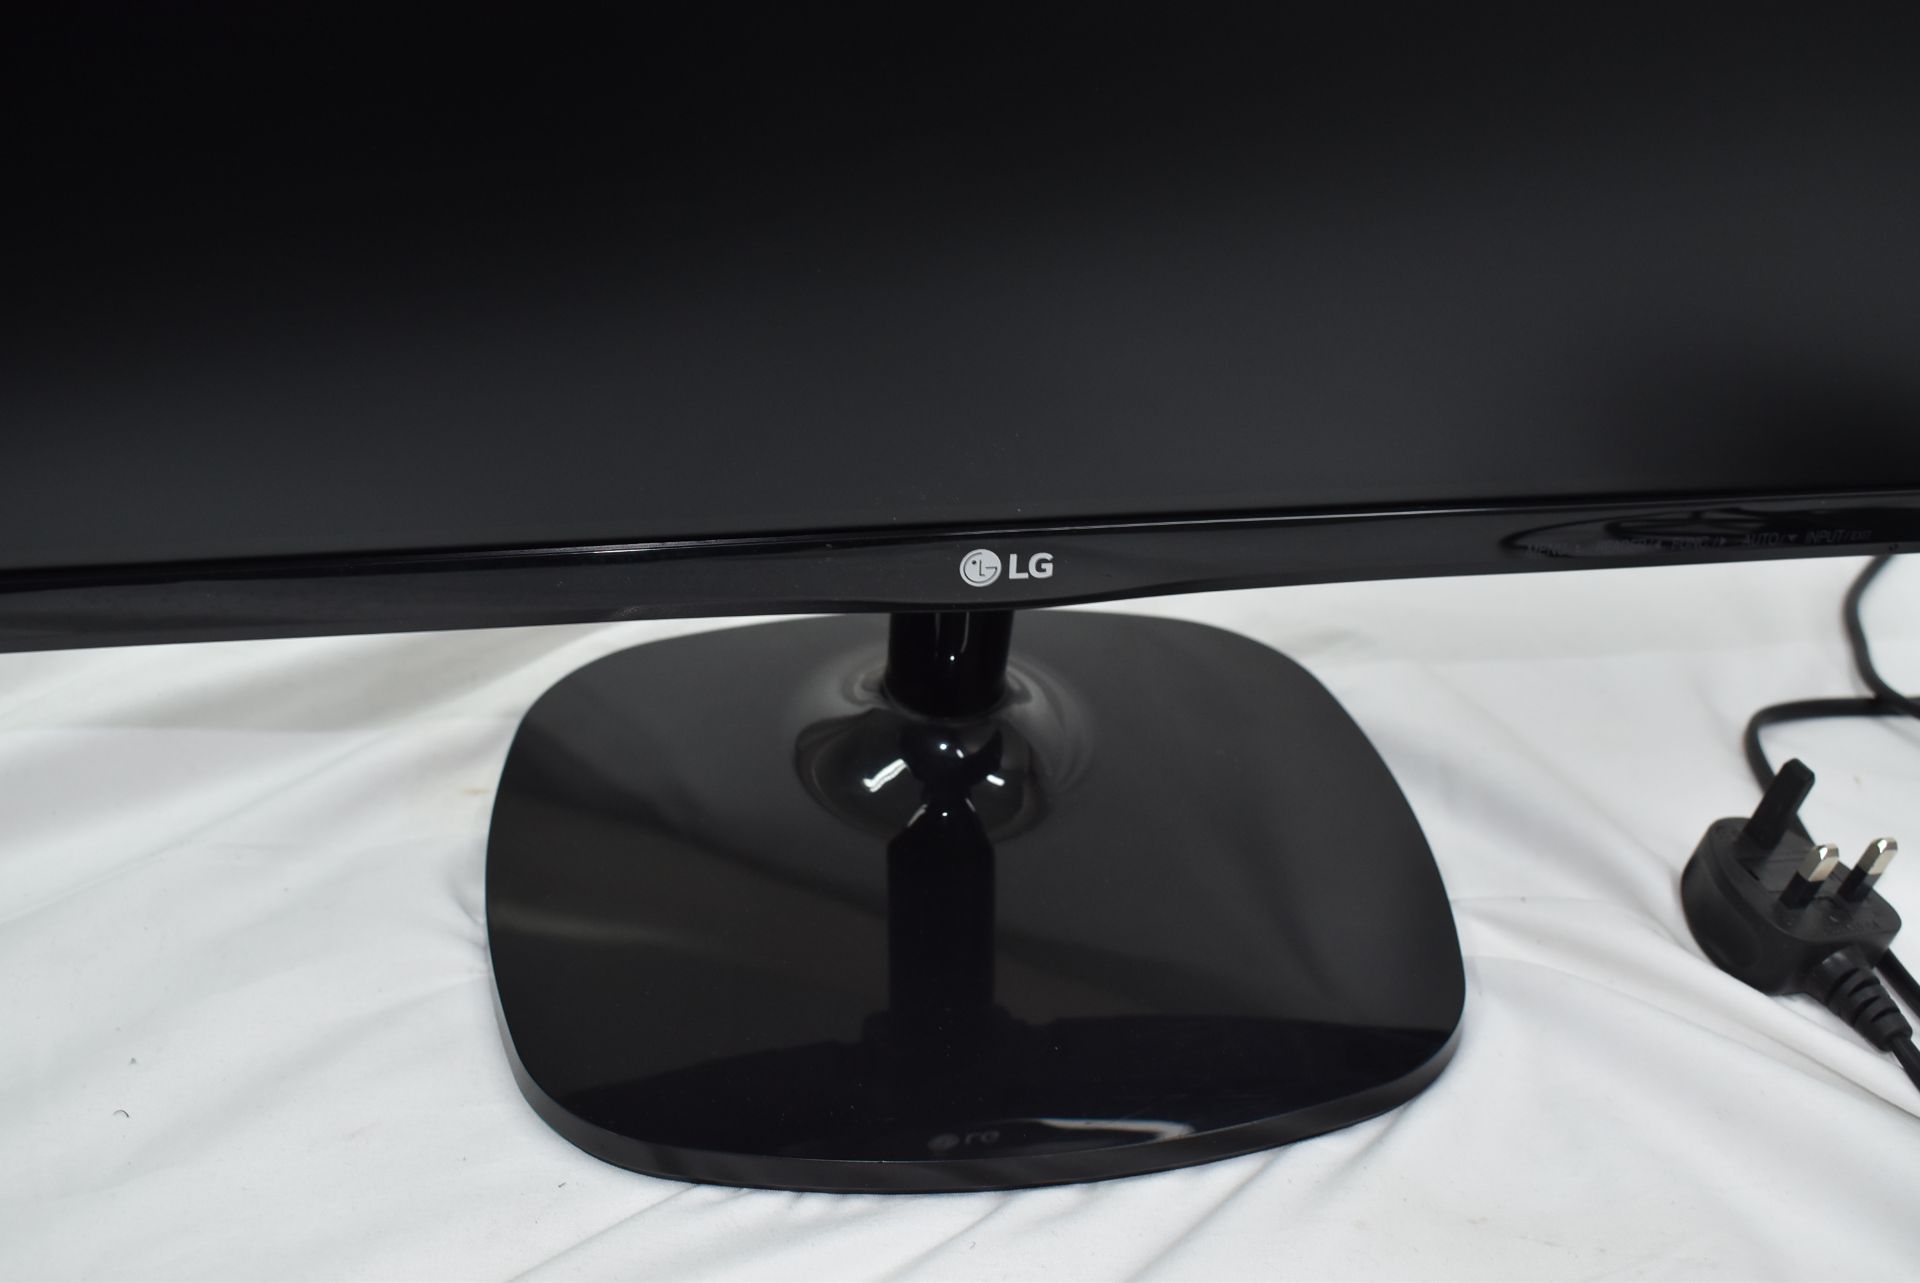 1 x LG 27 Inch LED Monitor - Model 27MP48HQ-P - Includes Power Supply and HDMI Lead - CL882 - - Image 3 of 4